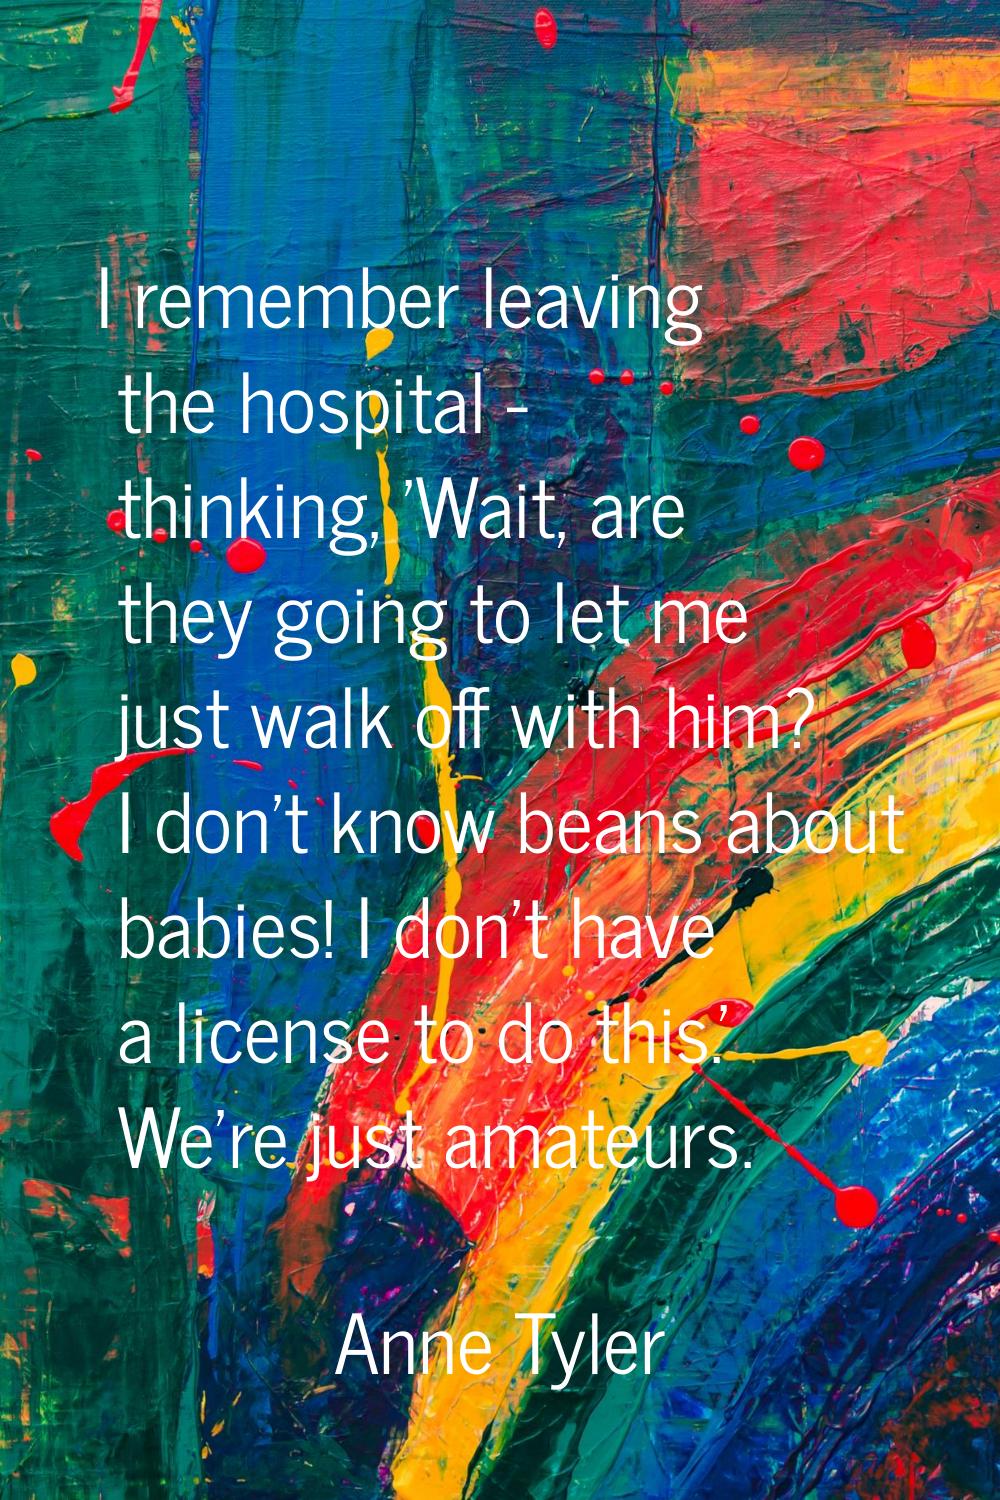 I remember leaving the hospital - thinking, 'Wait, are they going to let me just walk off with him?